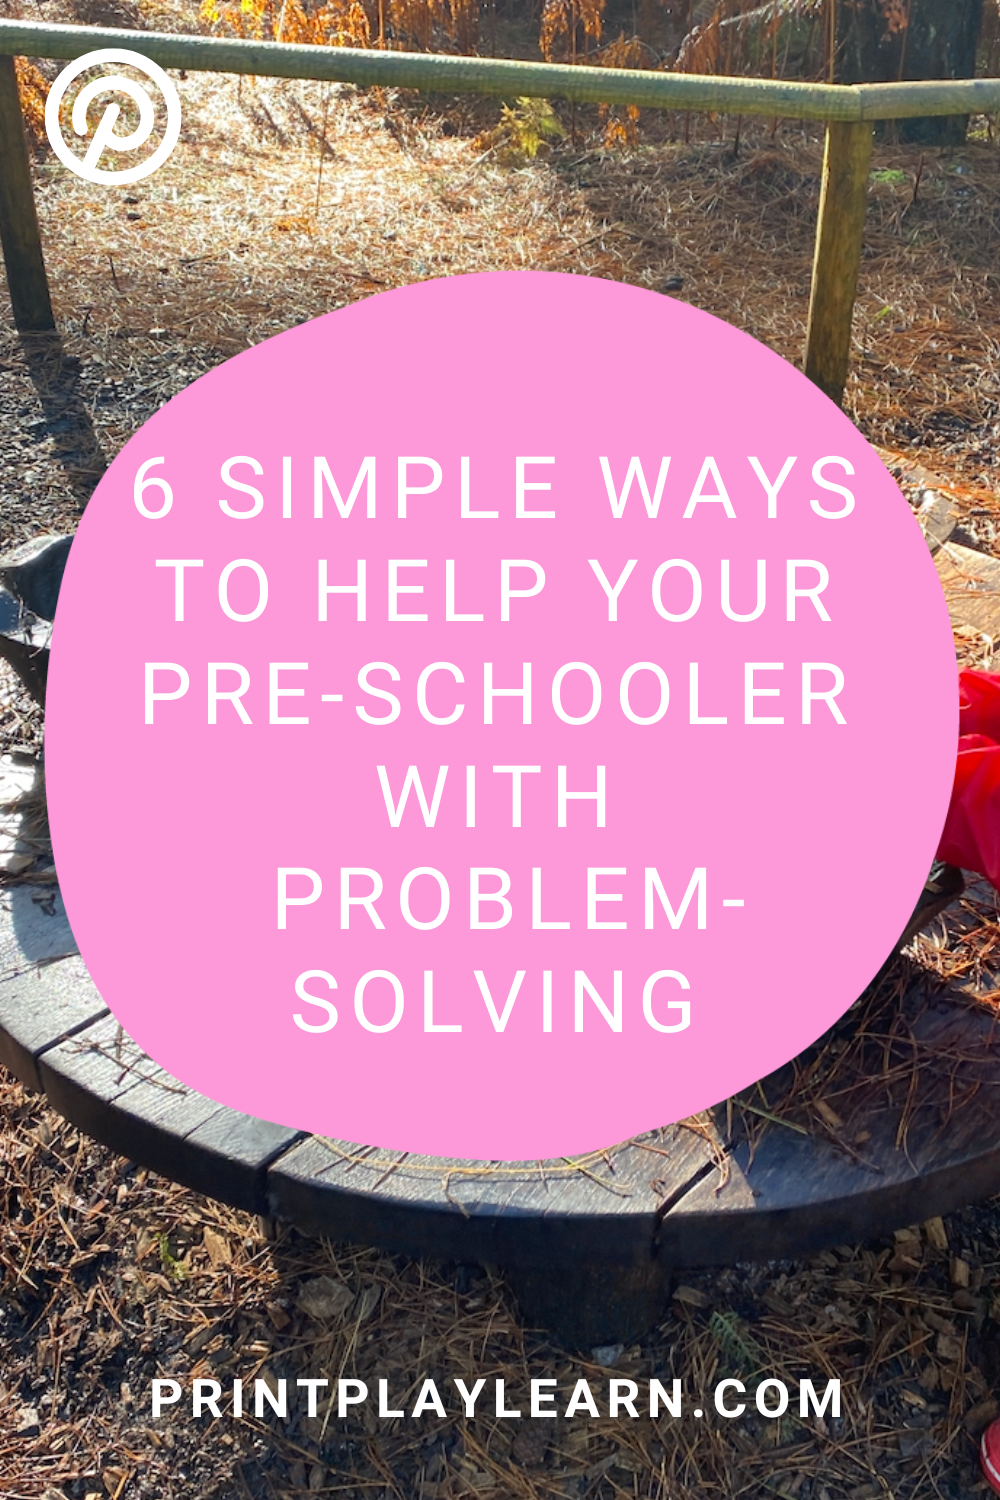 6 simple ways to help your pre-schooler with problem solving in white on pink print play learn photo of kid problem solving